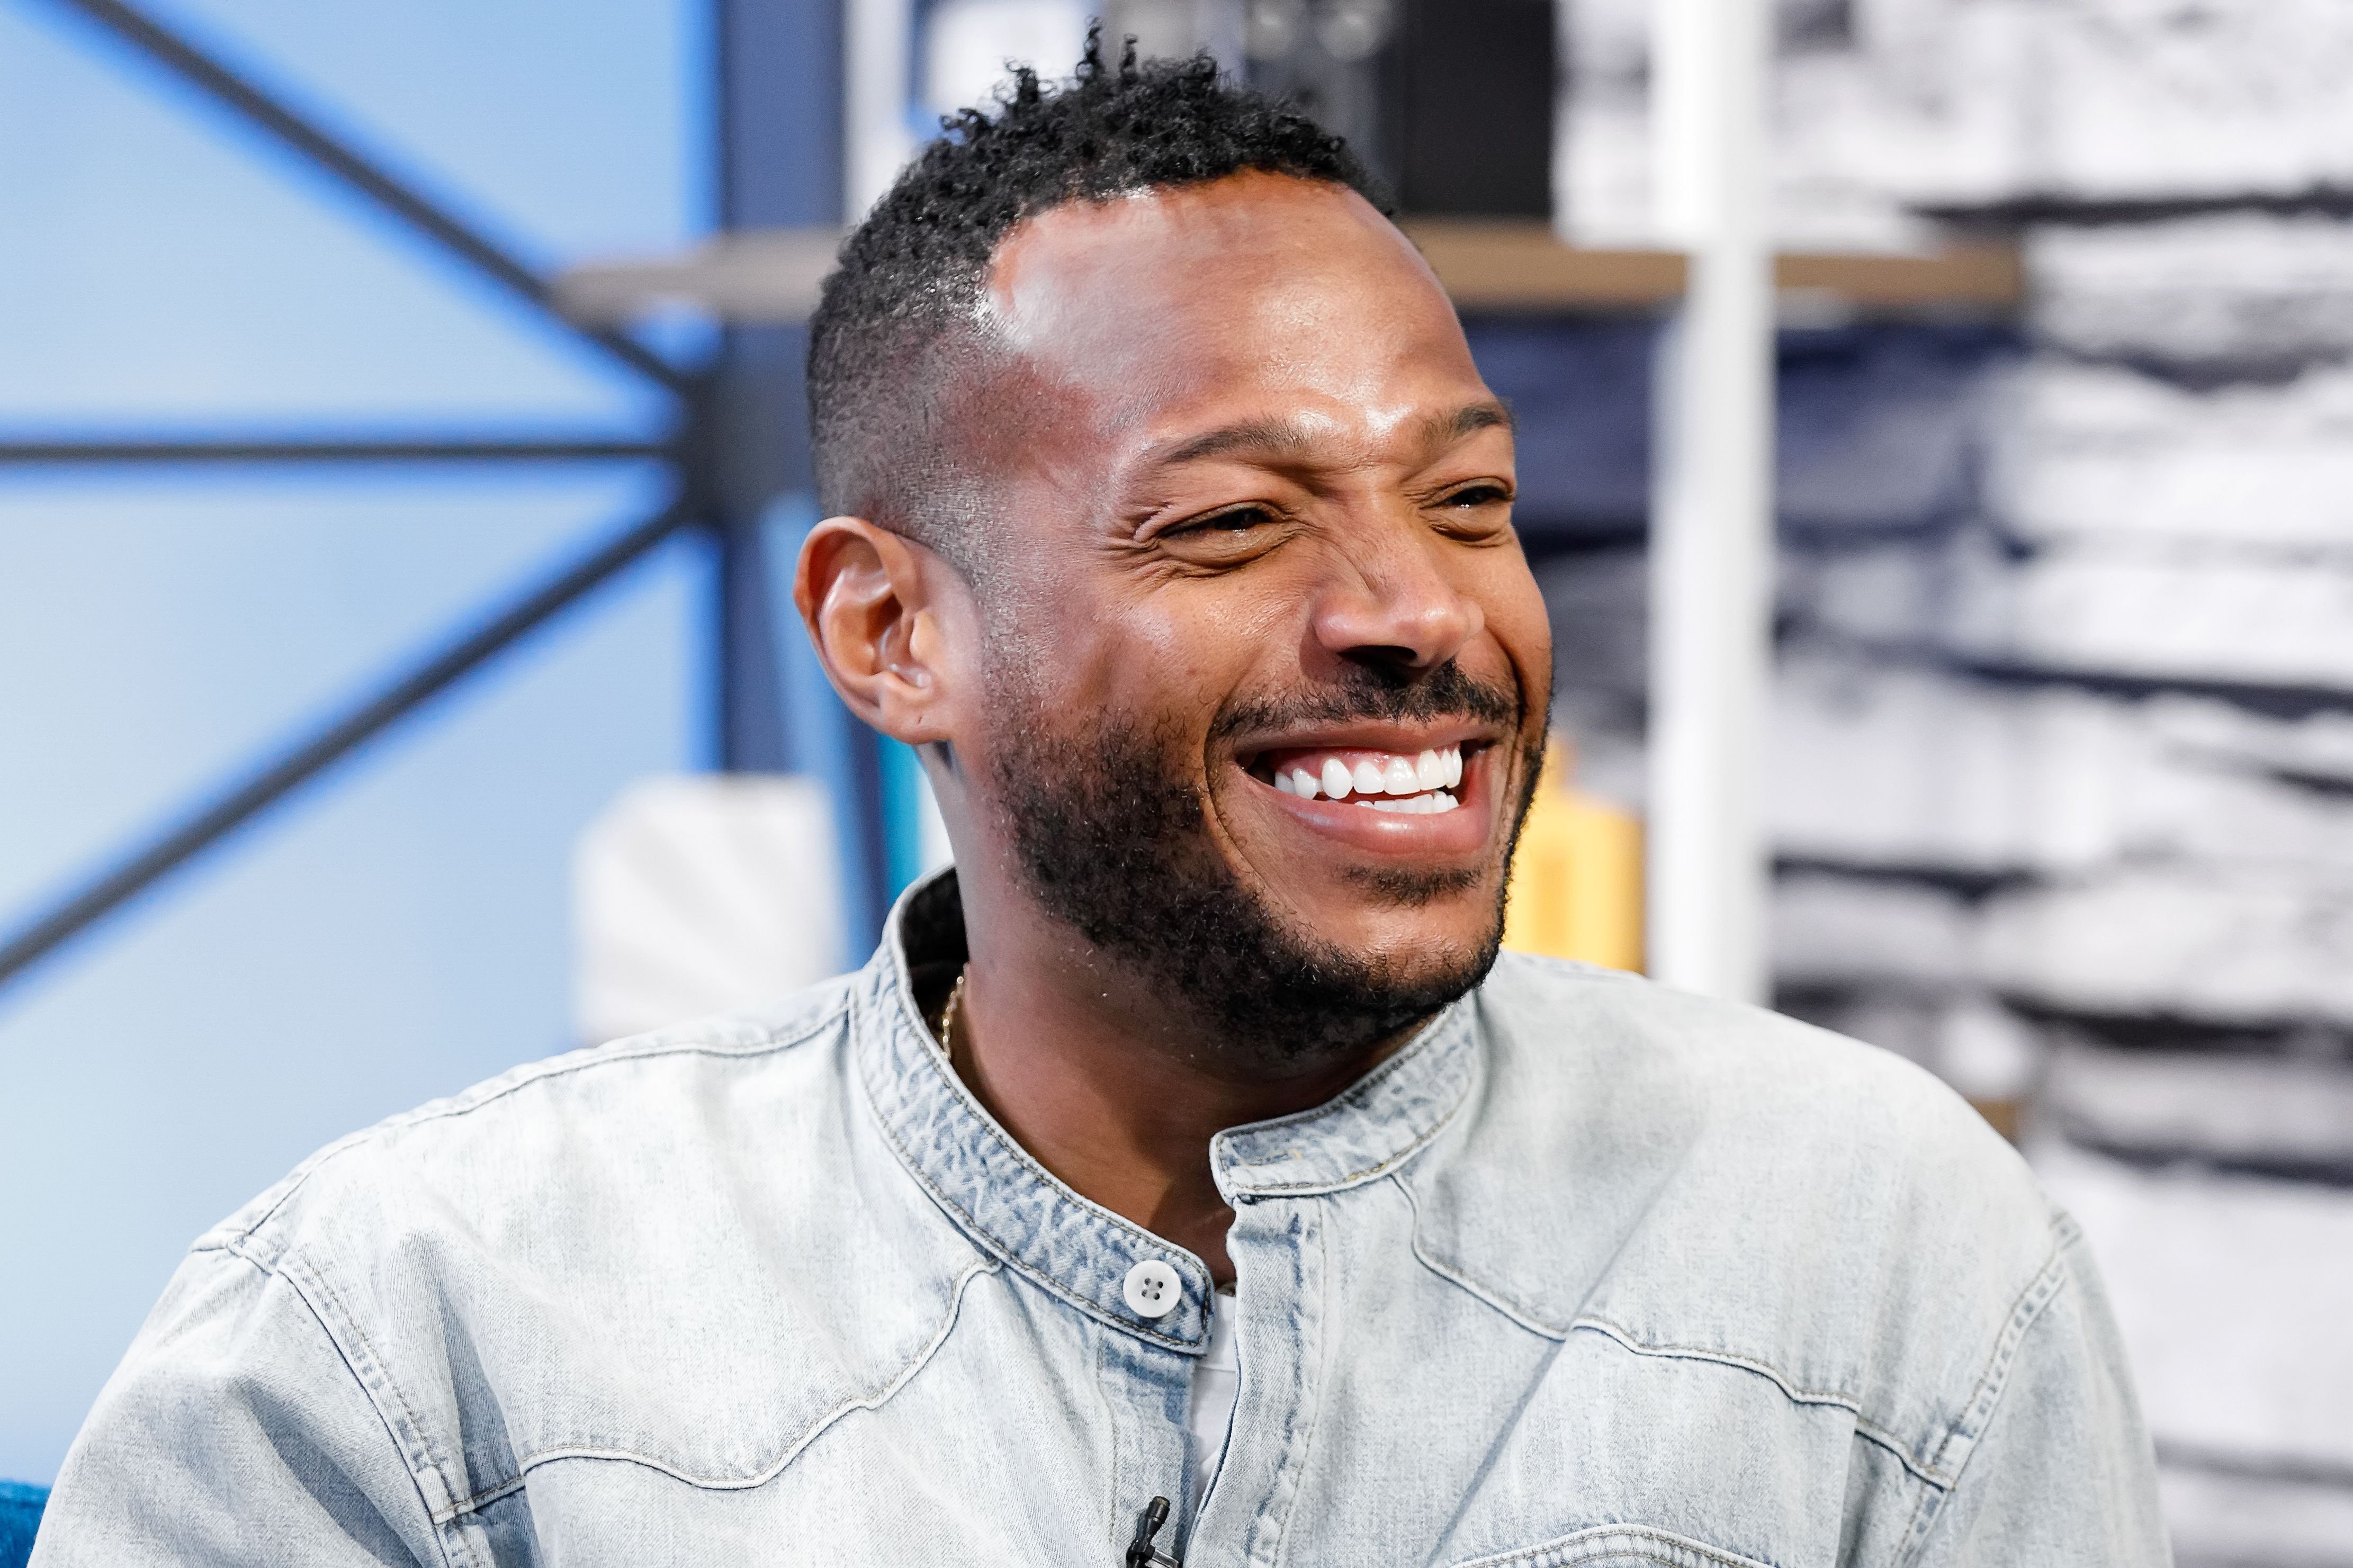 Marlon Wayans drops by 'The IMDb Show' on July 15, 2019 in Studio City, California. | Source: Getty Images